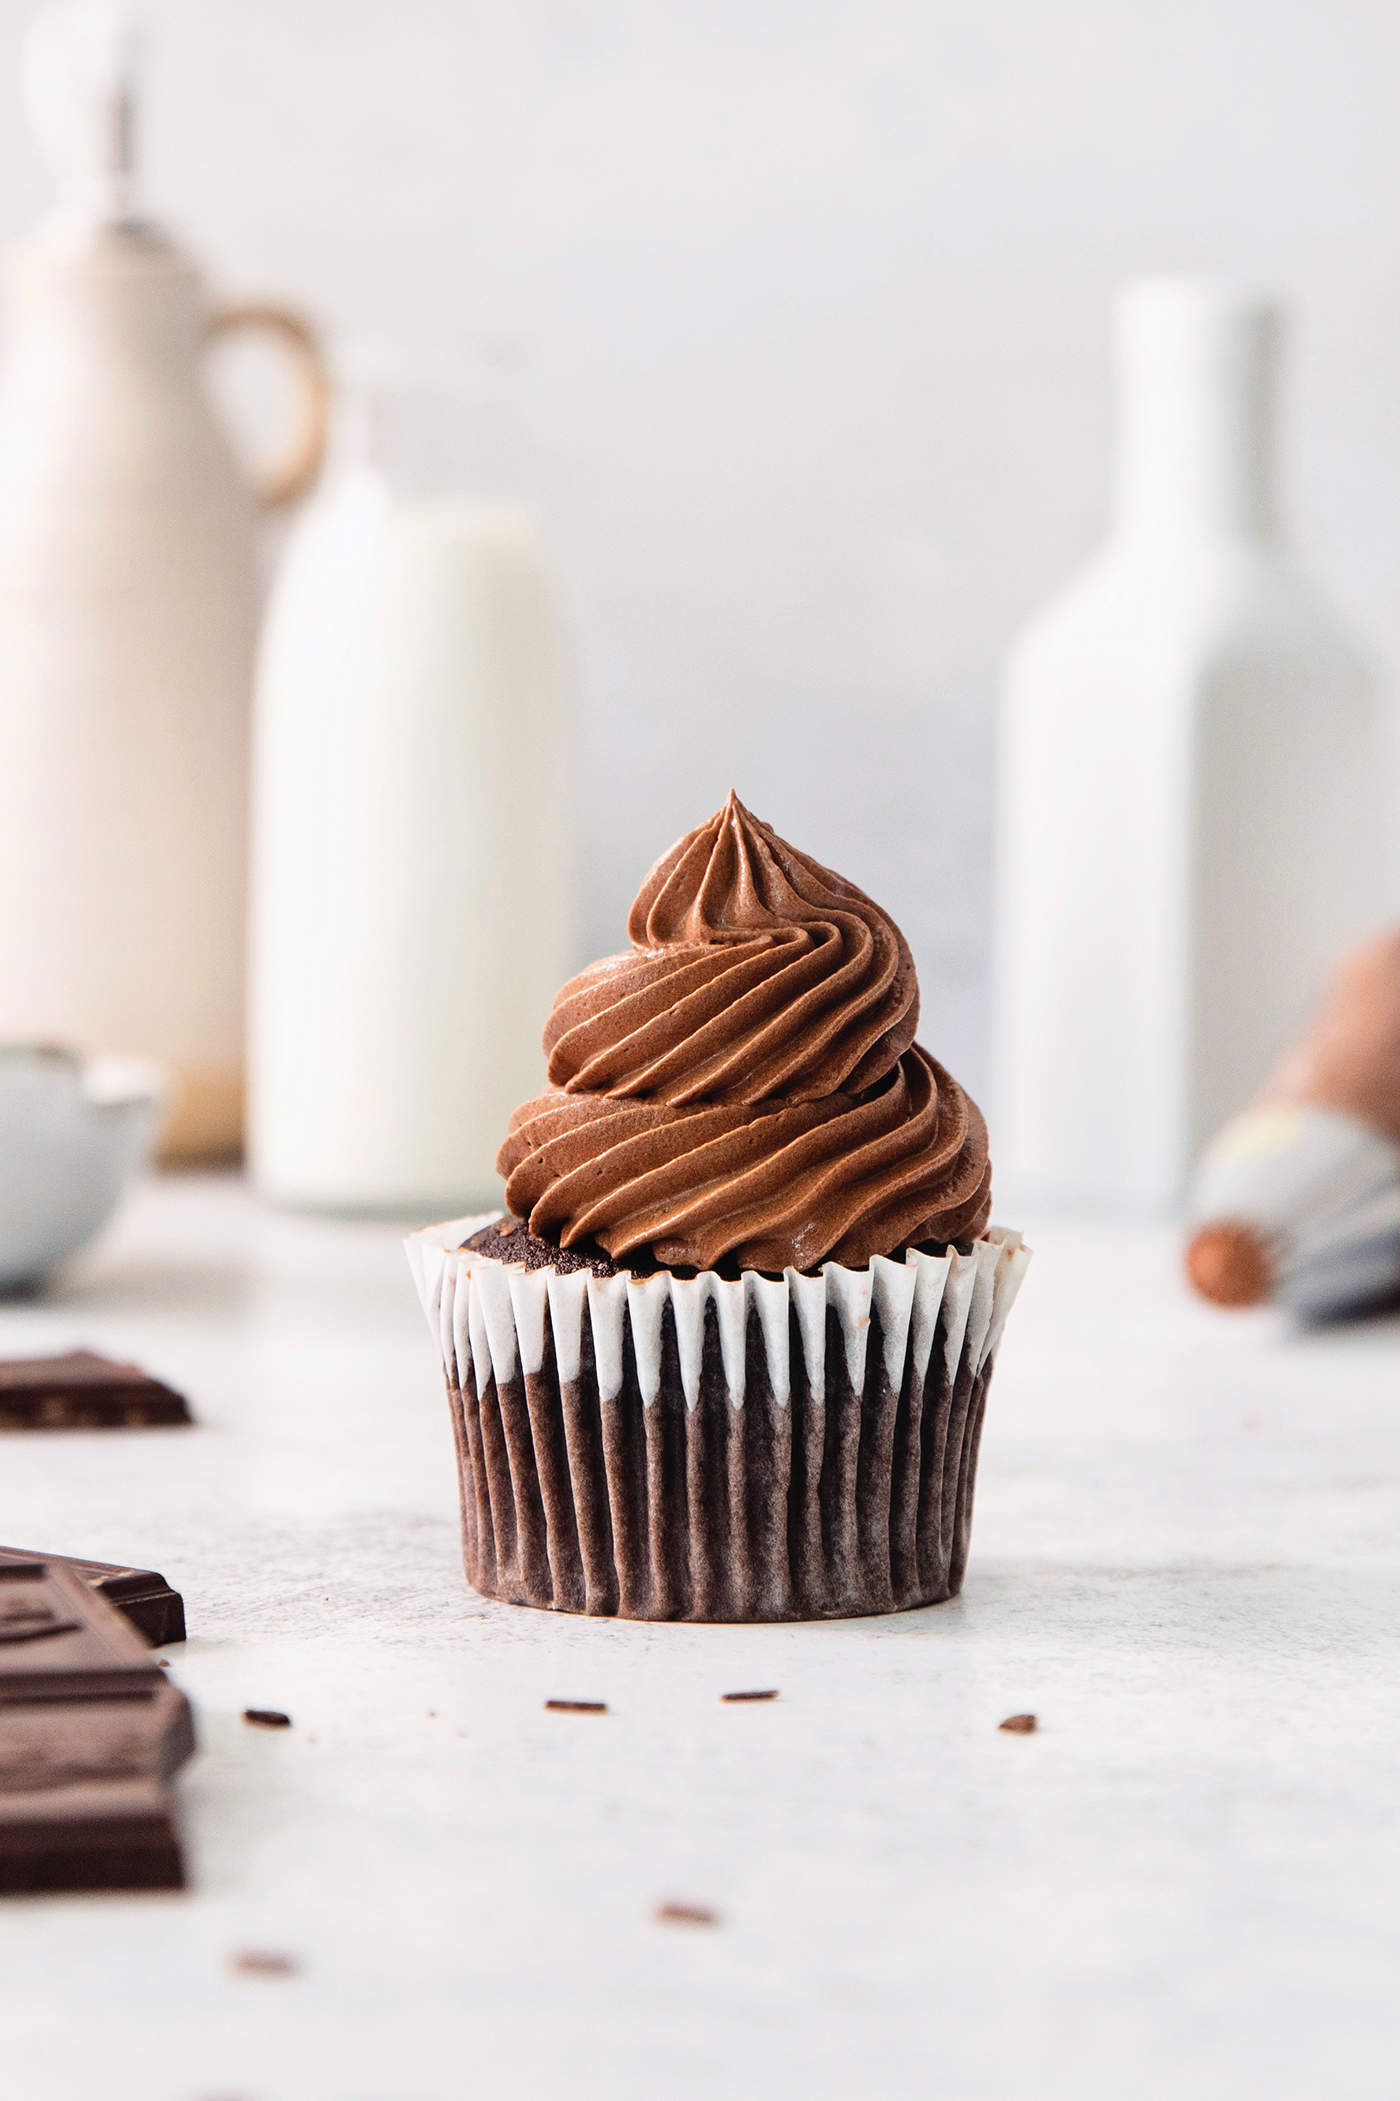 A chocolate cupcakes topped with chocolate ganache frosting.